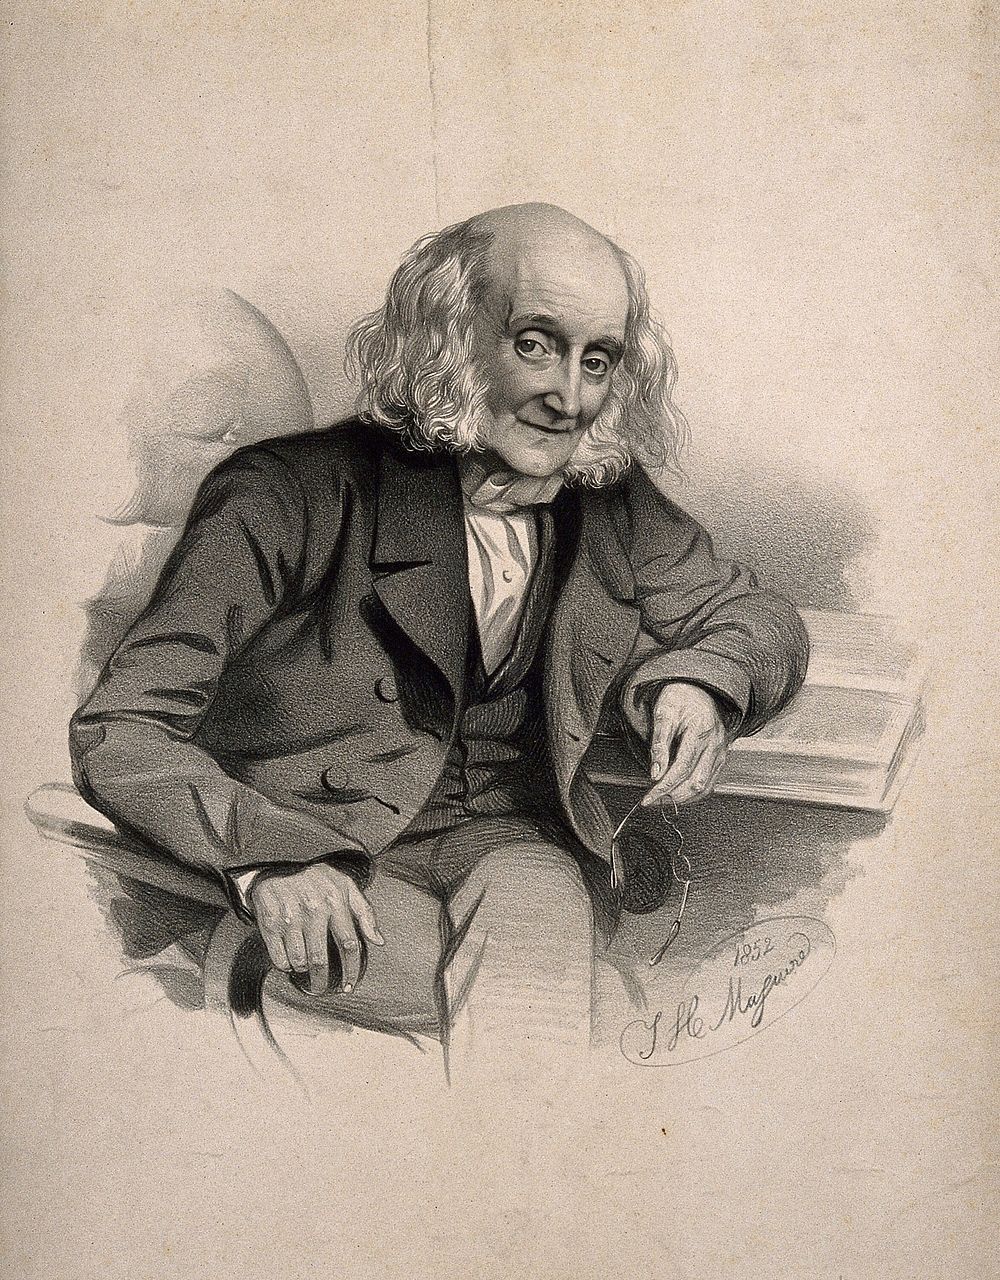 James Coleman, aged 102. Lithograph by T. H. Maguire, 1852.